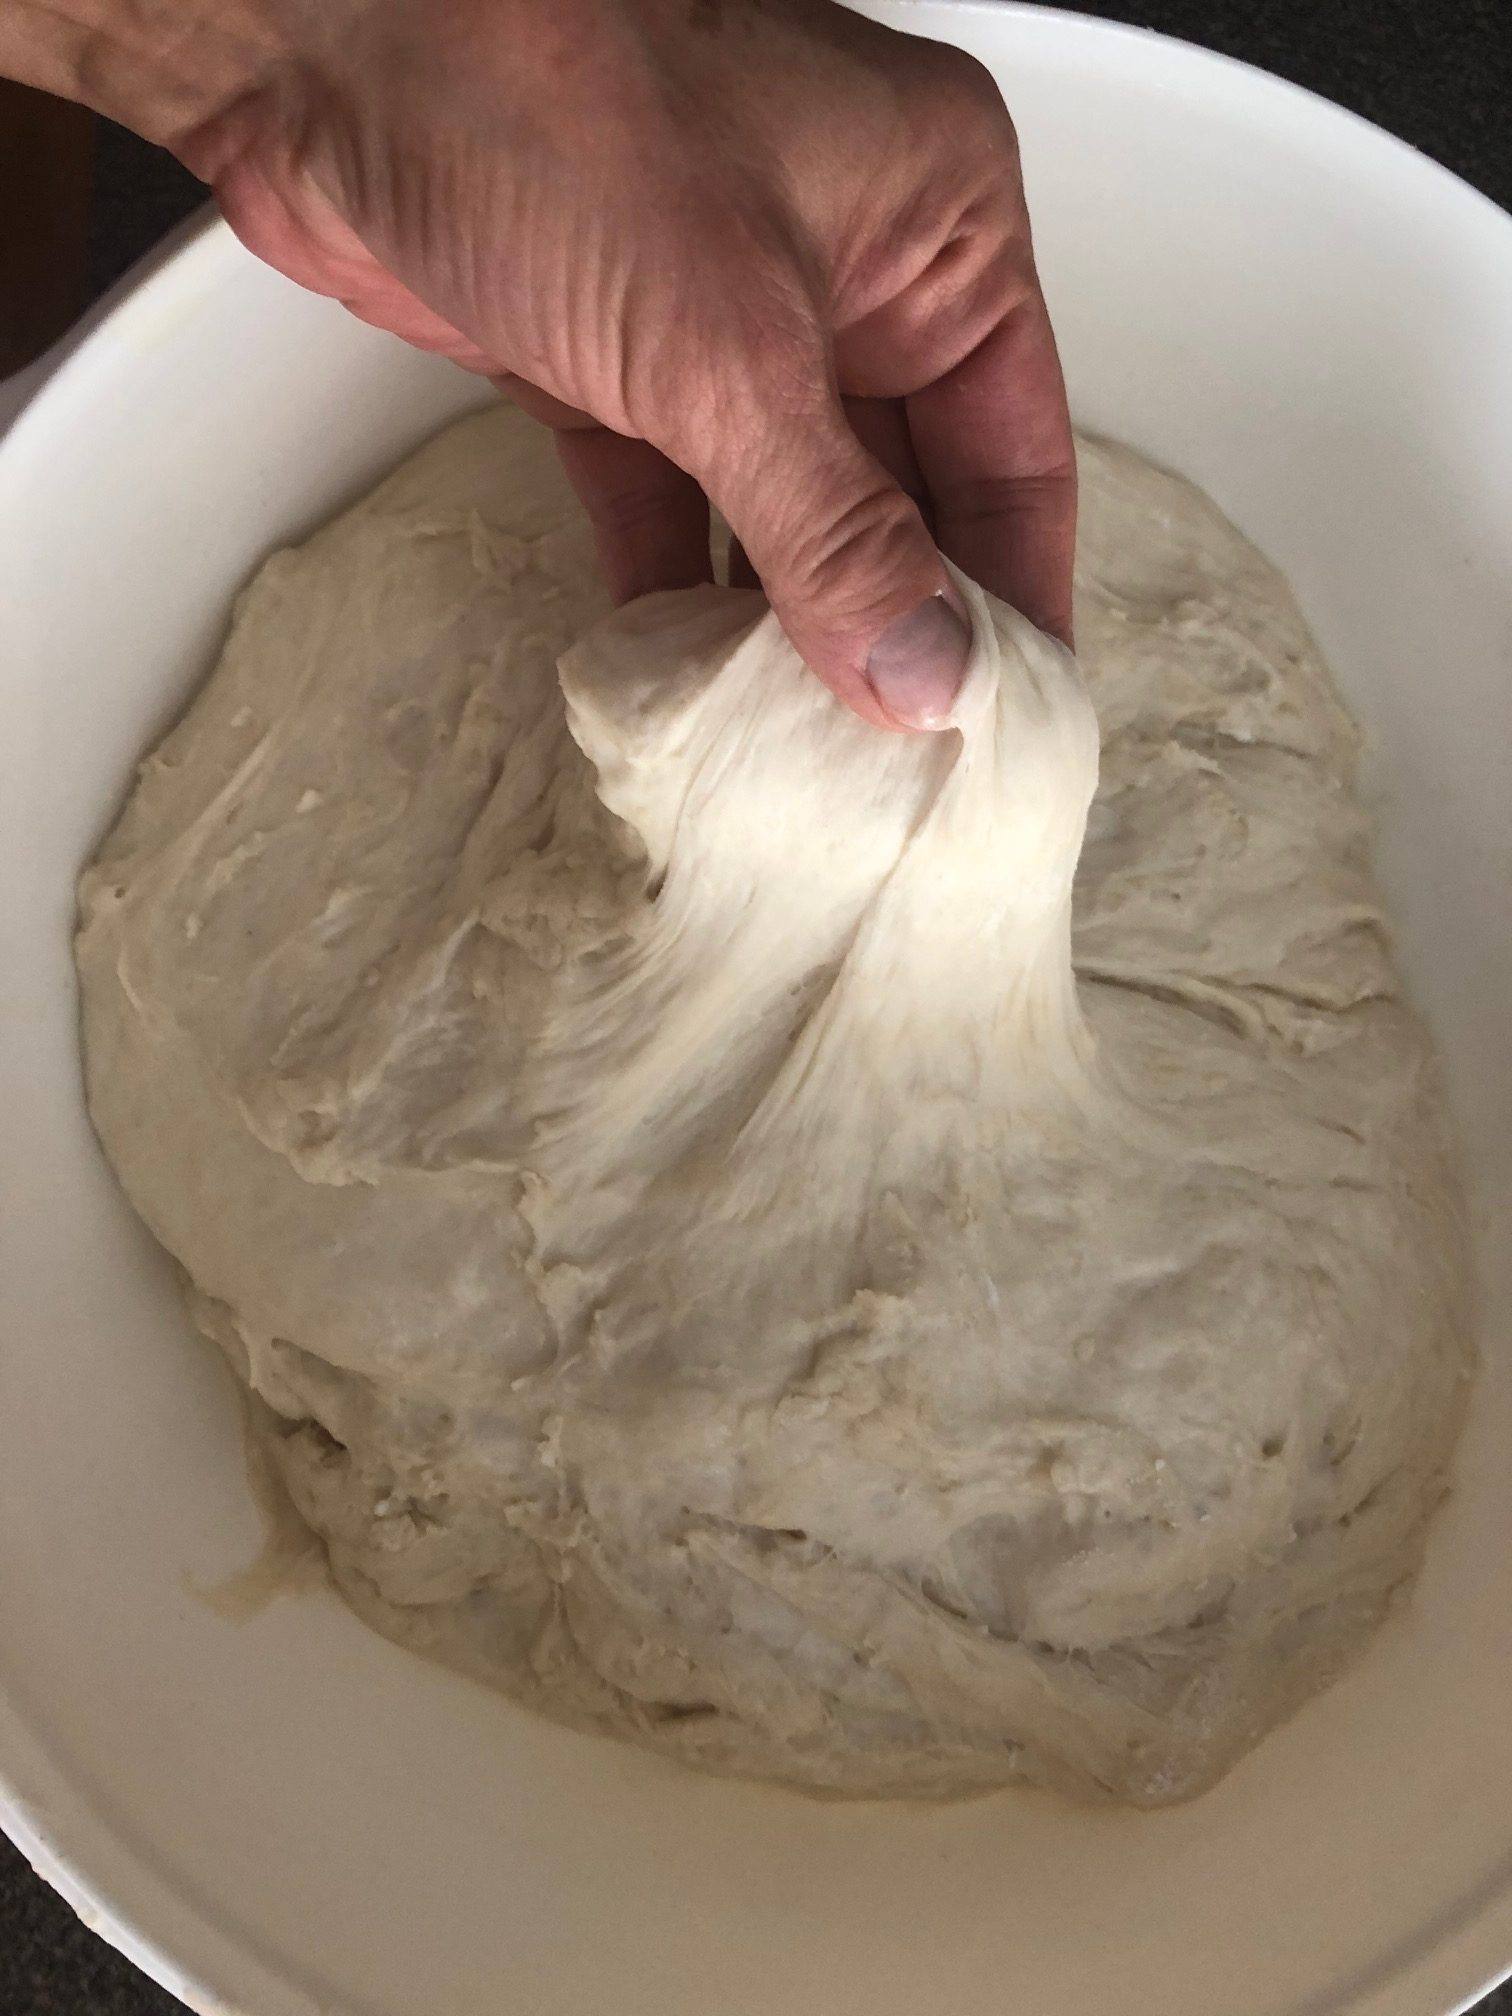 dough in a bowl being pulled up by a hand to show it's soft and spongy